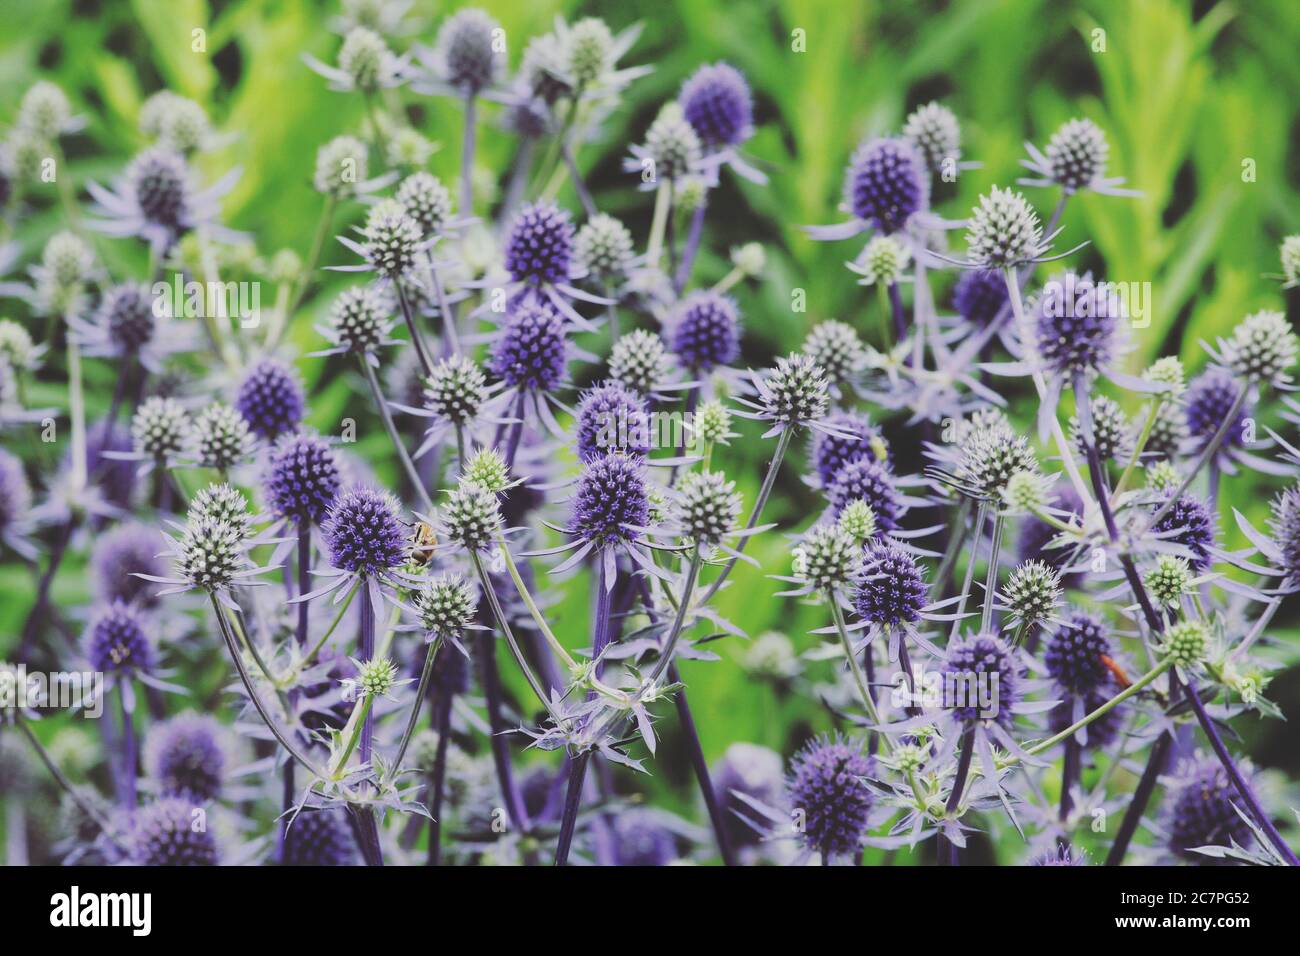 Mediterranean sea holly (Eryngium bourgatii ) blooming in the sunlight Stock Photo